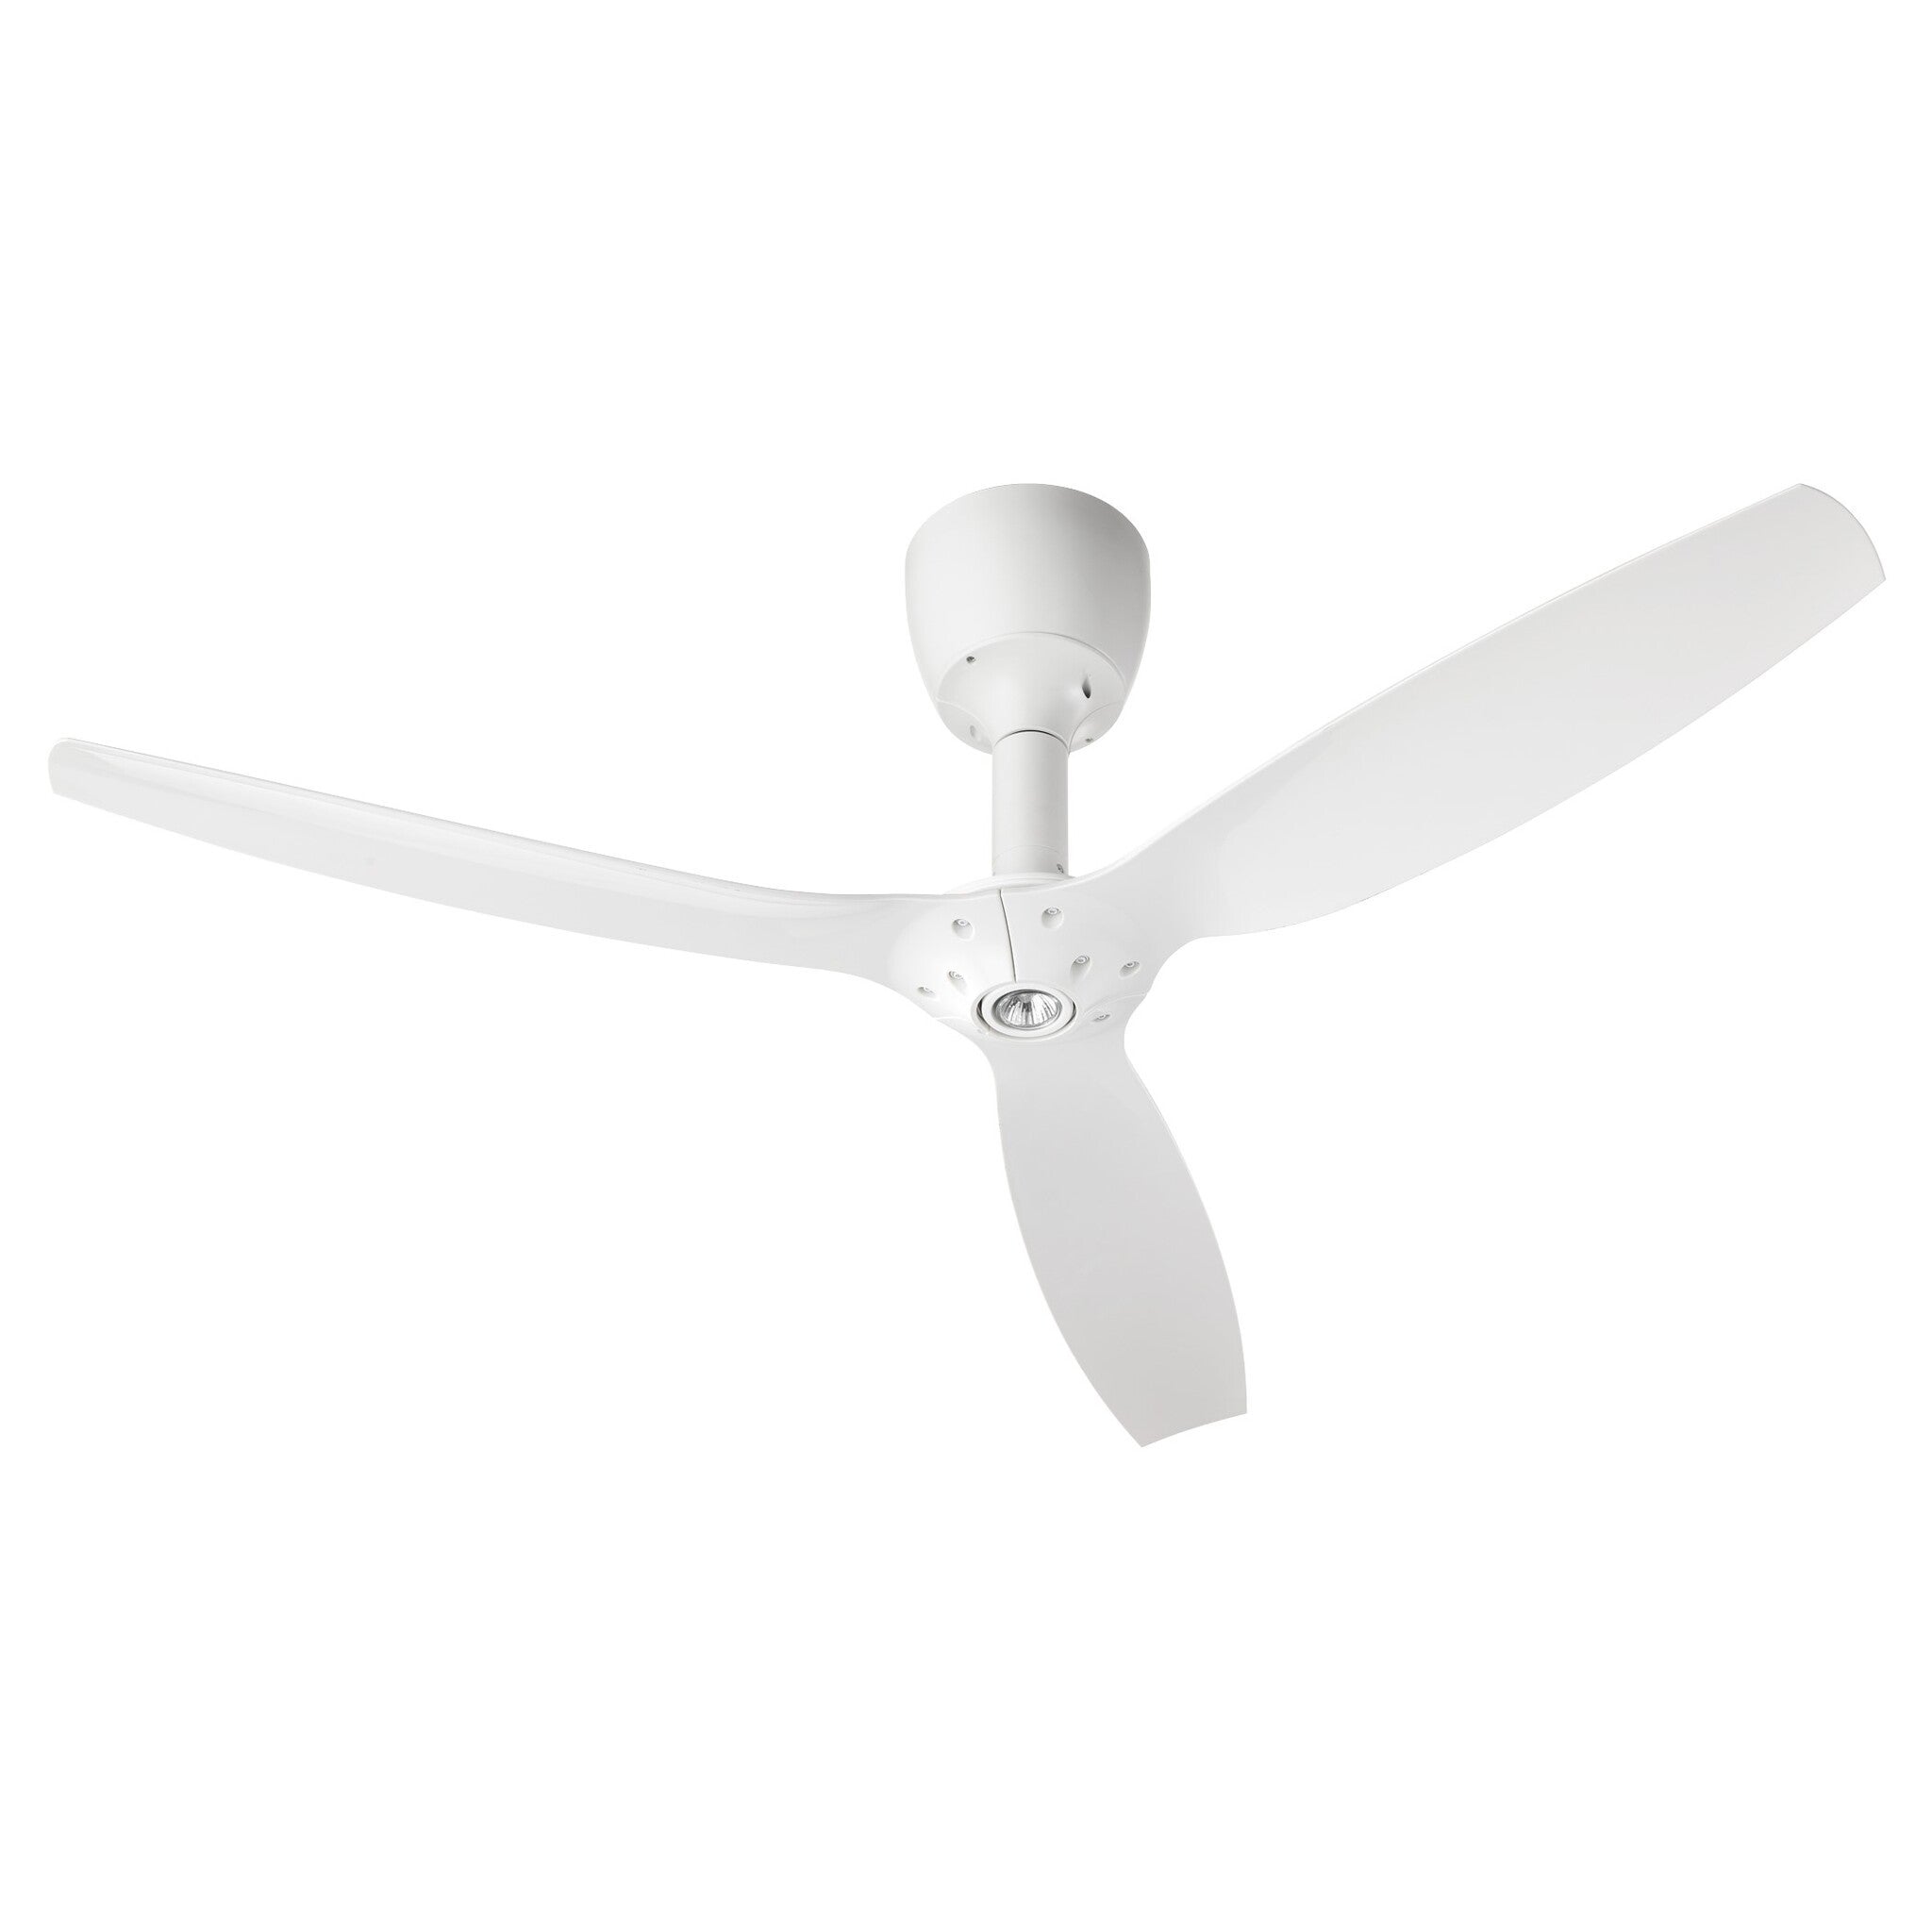 Oxygen ALPHA 3-105-06 60 Inch Ceiling Fan Motor with LED Light - White (Order Blades Separately)